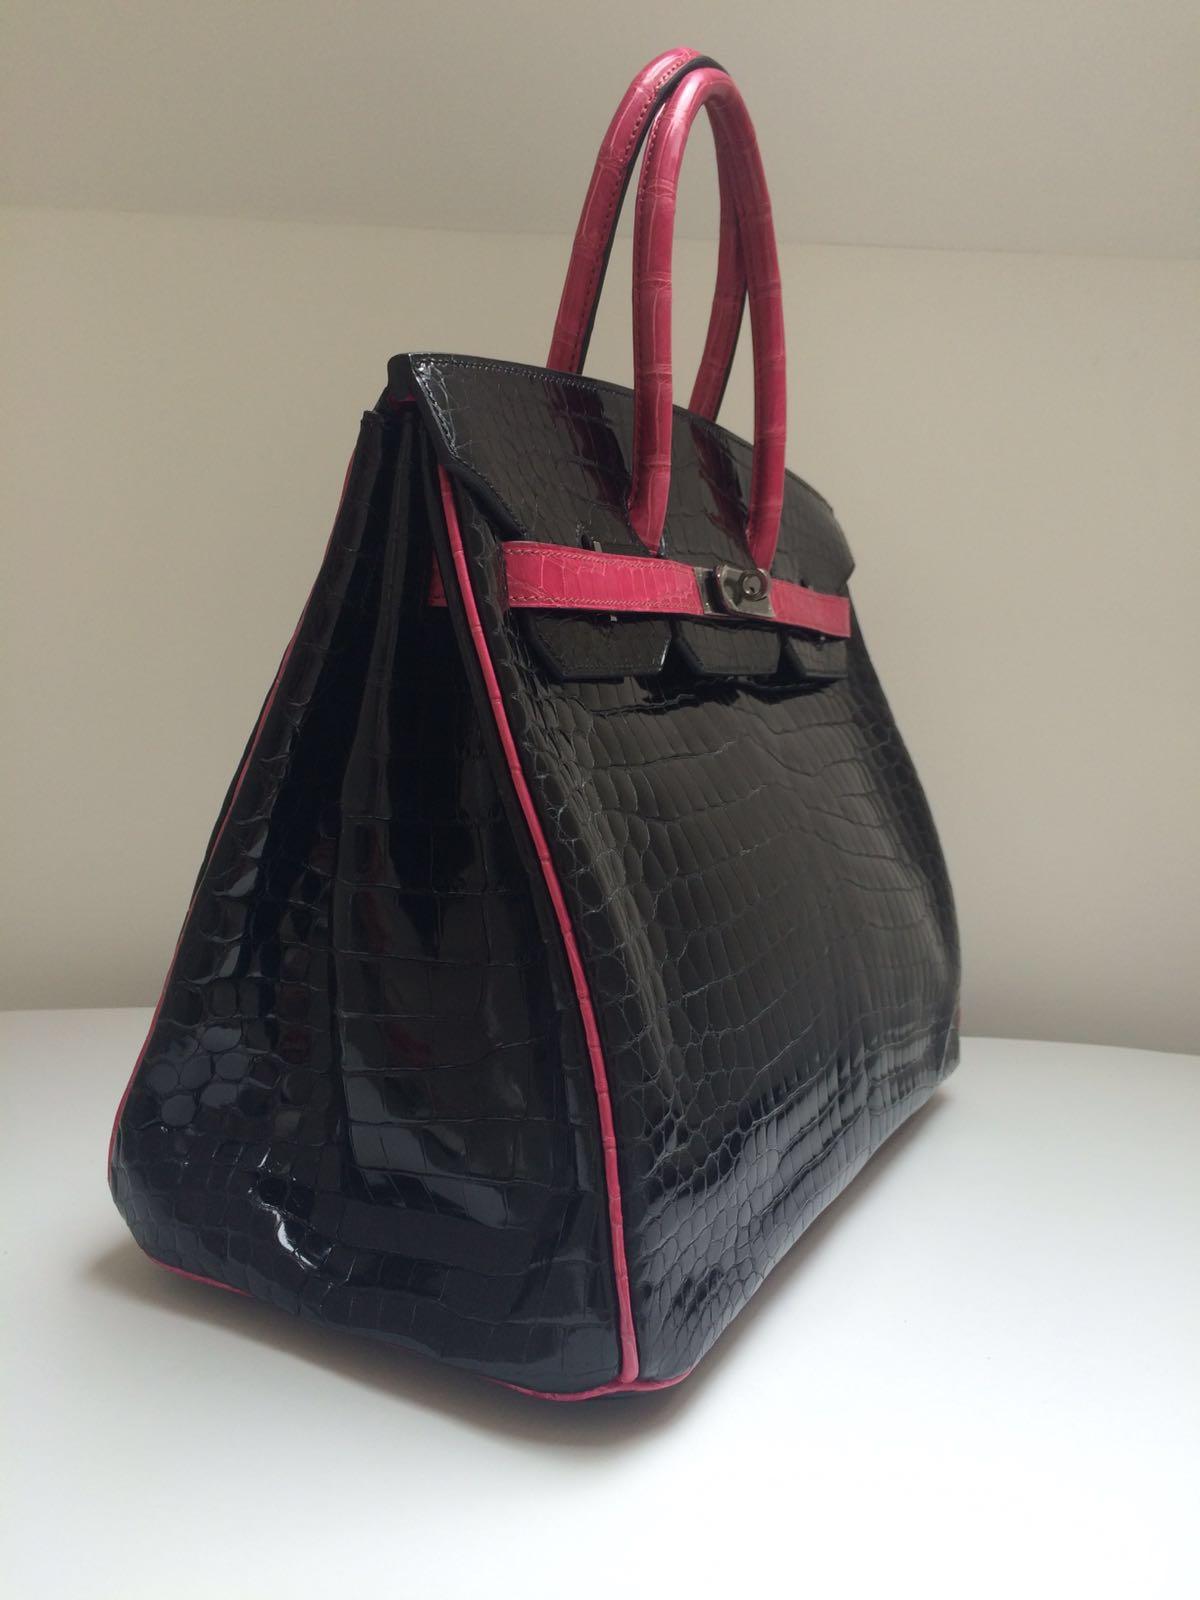 This beautiful 35cm Birkin is one from a series made 10 years or so ago in Black Shiny Porosus Crocodile and Ruthenium hardware with piping, straps and the handle in one of their bright standout colours – on this occasion Fuchsia.  Ruthenium is a